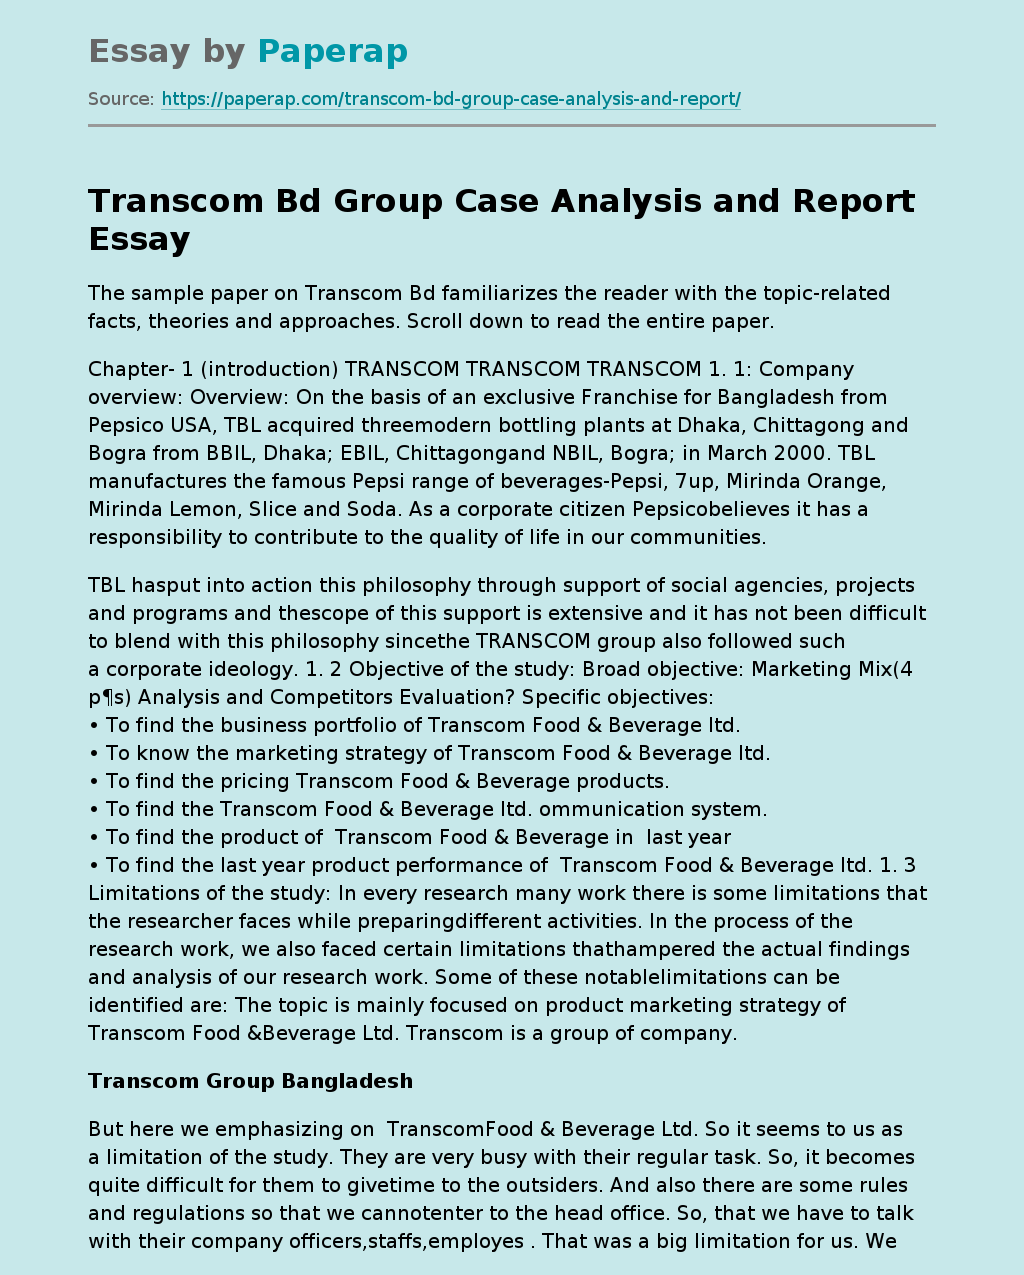 Transcom Bd Group Case Analysis and Report